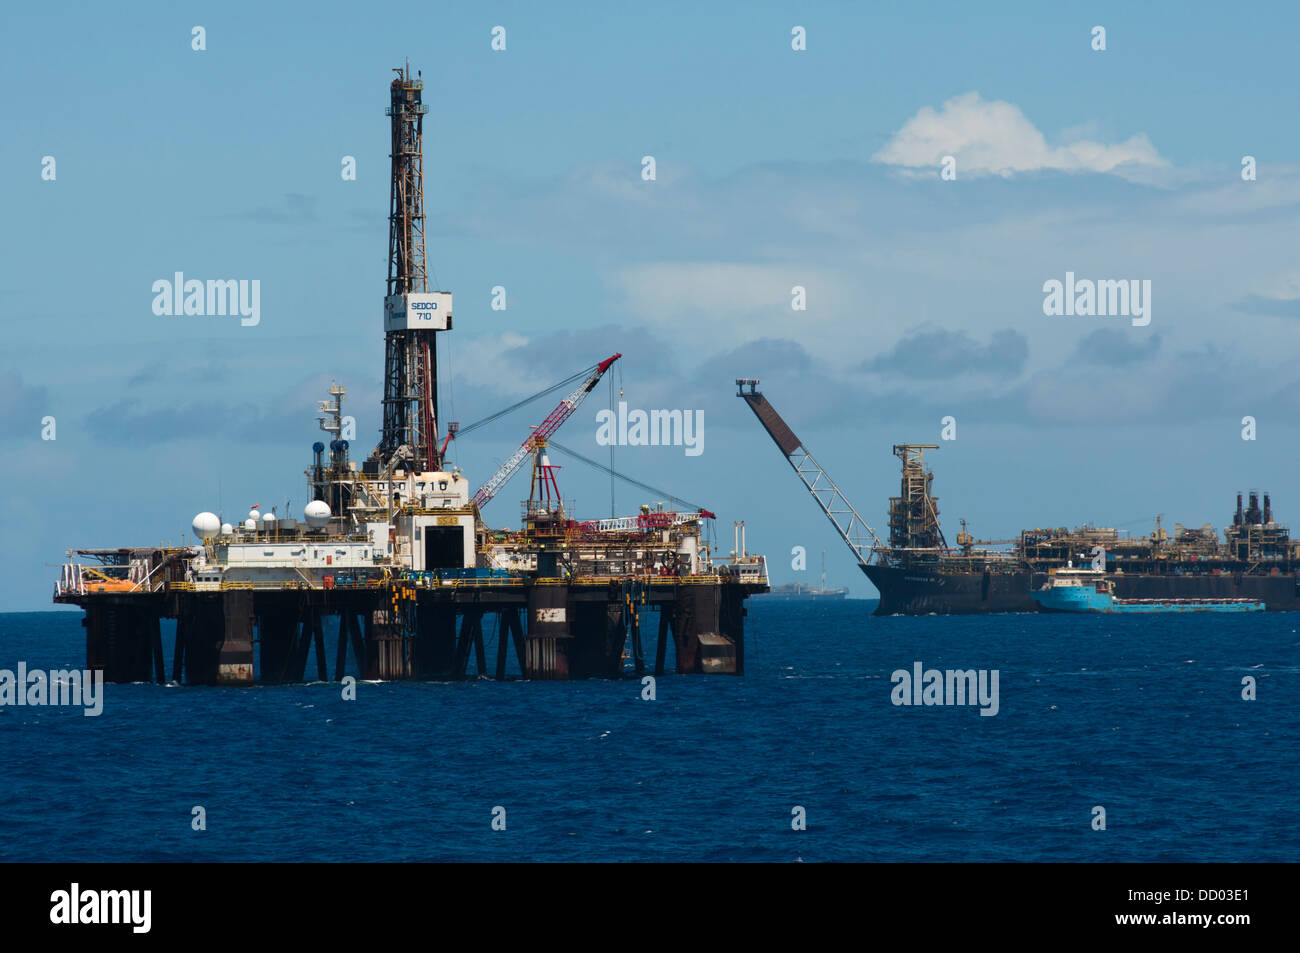 drilling rig and an FPSO vessel at oil field in Campos basin, Brazil Stock Photo